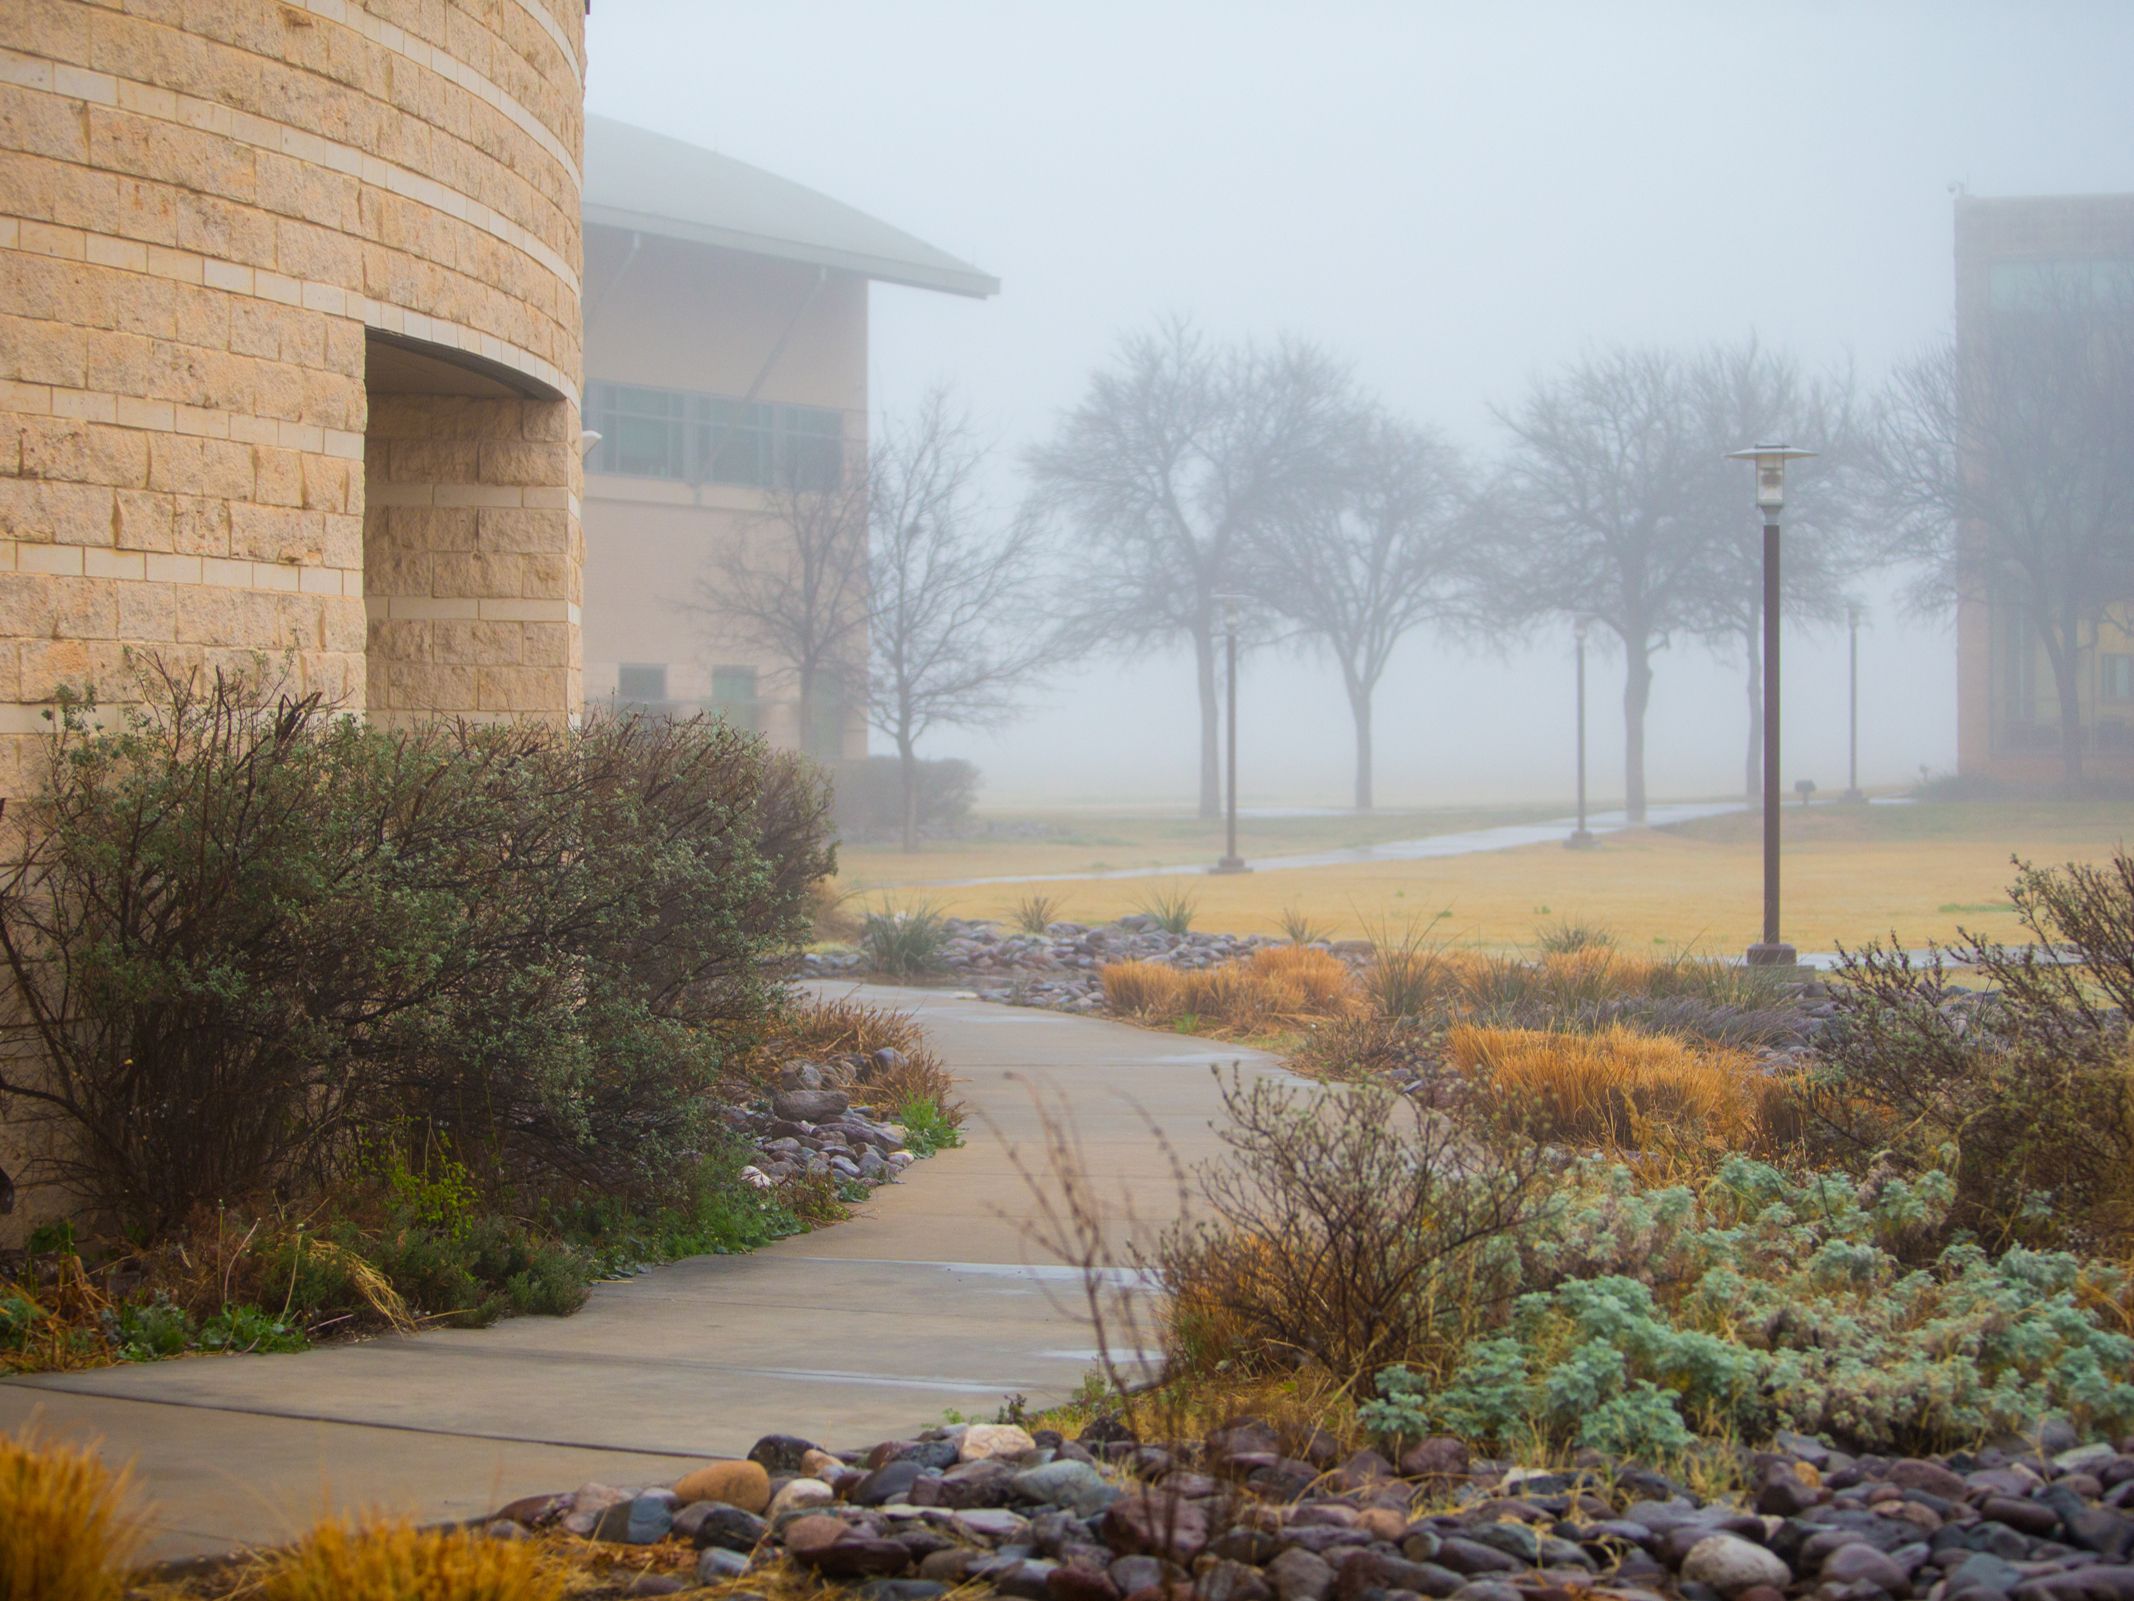 Picture of foggy campus